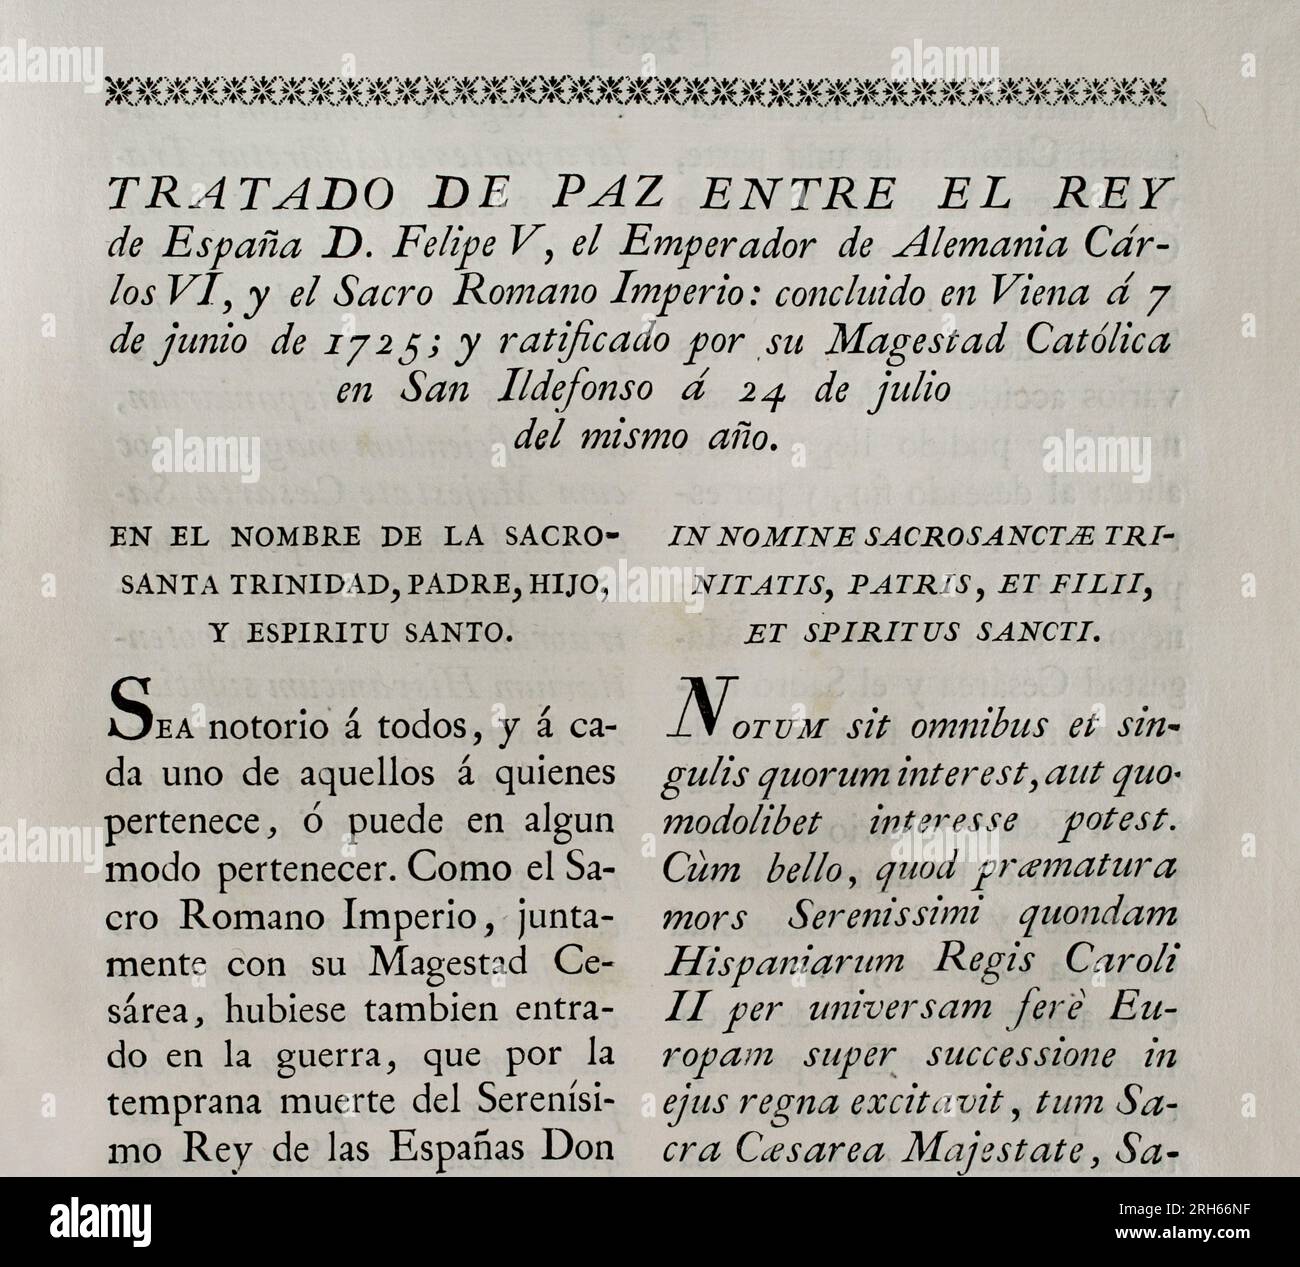 Peace treaty between the King of Spain Philip V and the Holy Roman Emperor Charles VI. Concluded in Vienna on 7 June 1725; ratified by Philip V in San Ildefonso on 24 July of that year. Collection of the Treaties of Peace, Alliance, Commerce adjusted by the Crown of Spain with the Foreign Powers (Coleccion de los Tratados de Paz, Alianza, Comercio ajustados por la Corona de Espana con las Potencias Extranjeras). Volume II. Madrid, 1800. Historical Military Library of Barcelona, Catalonia, Spain. Stock Photo